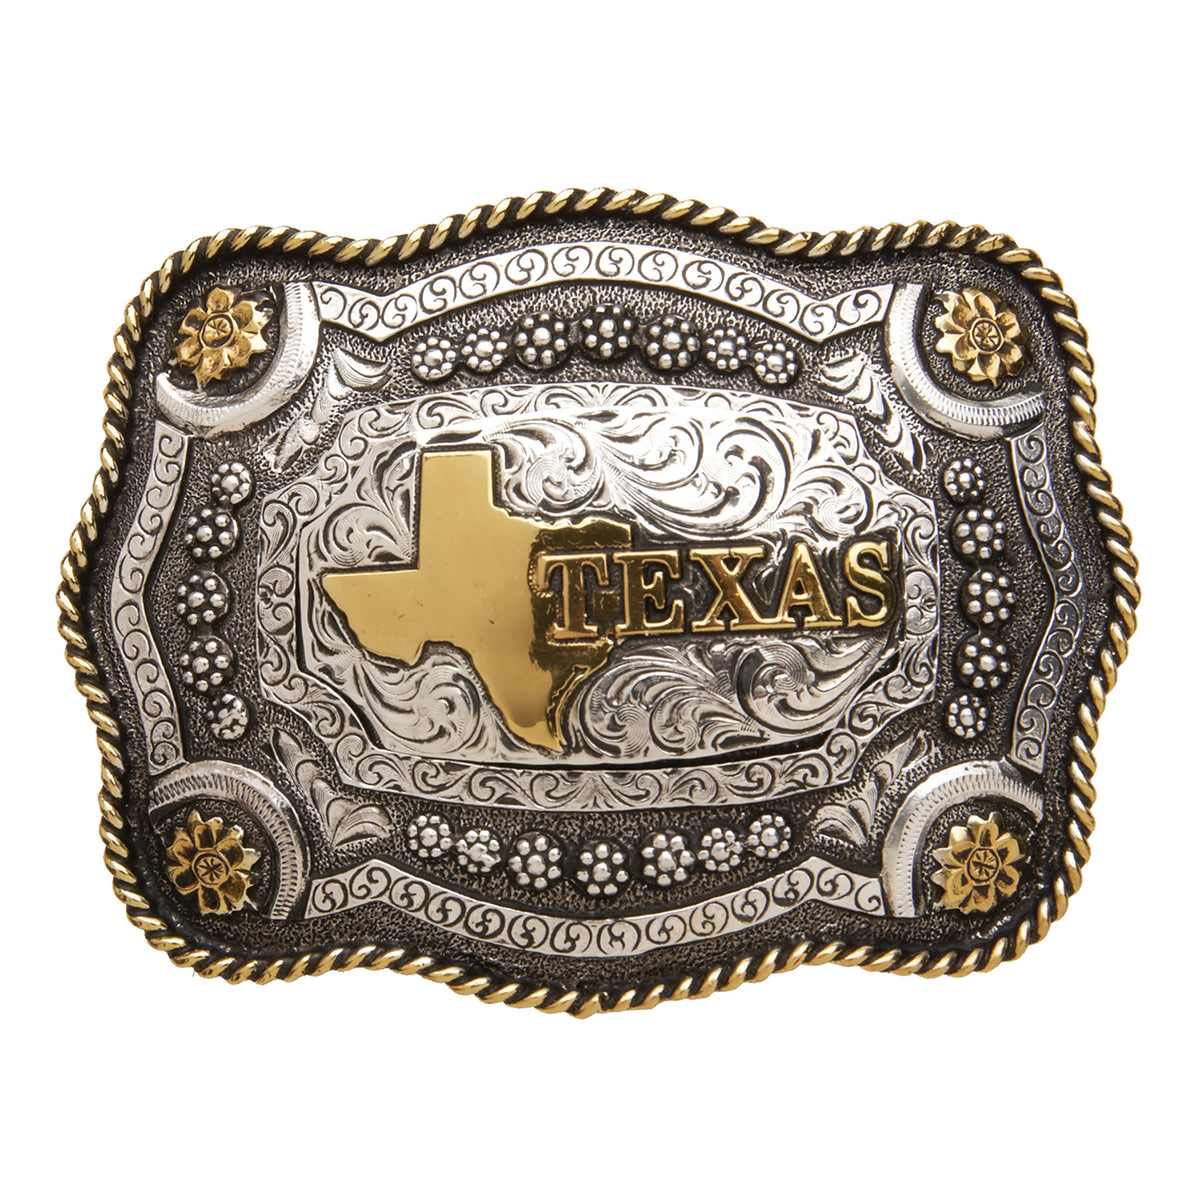 Texas State — Scallop Rope Edge Buckle